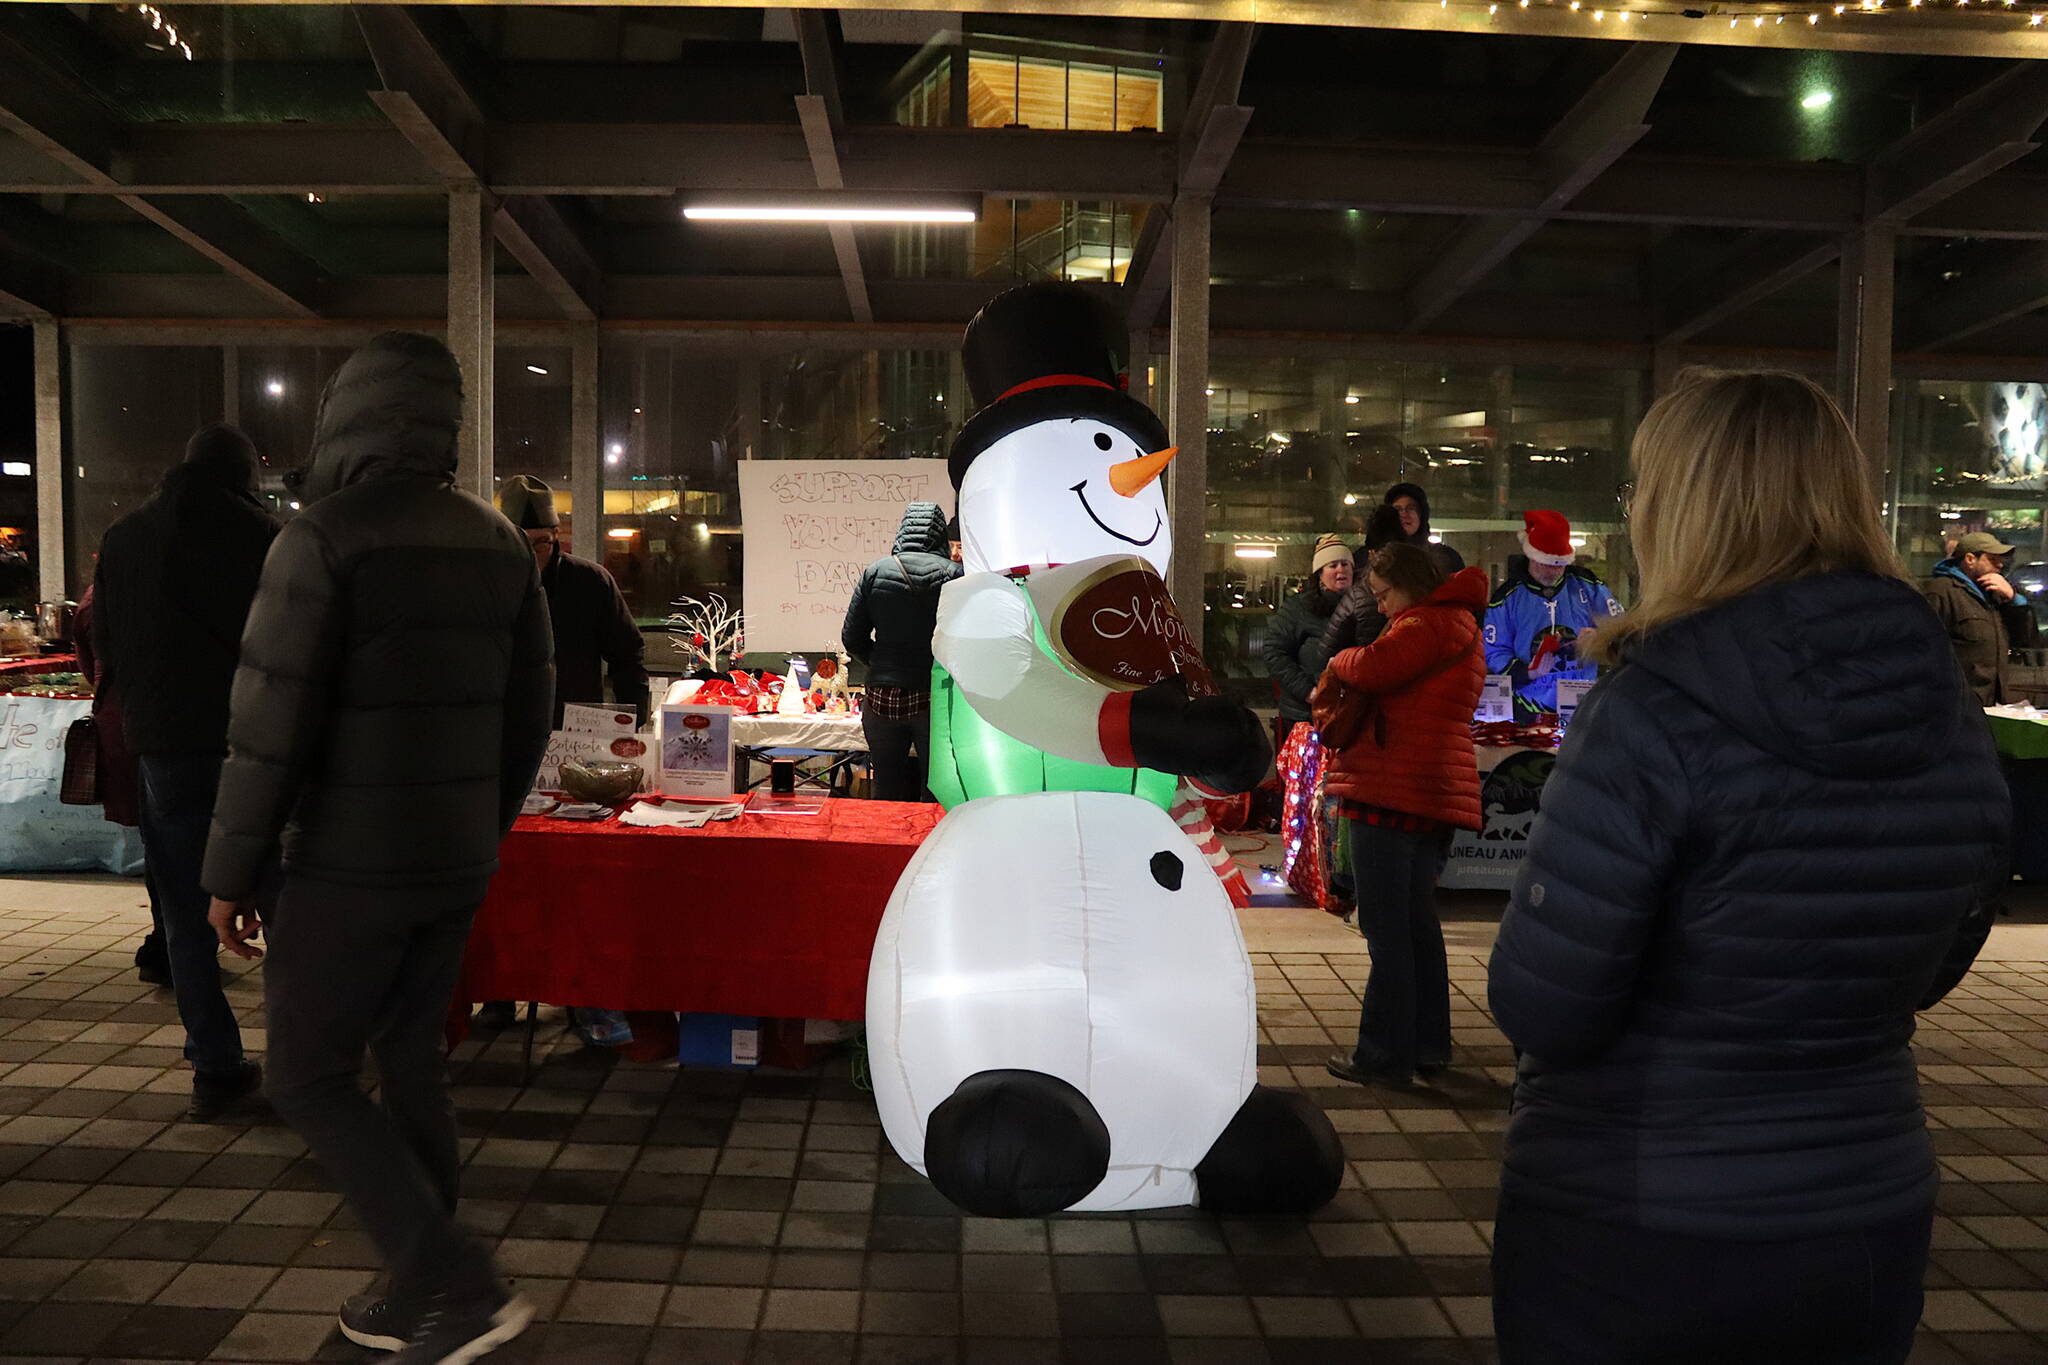 A giant inflatable snowman greets shoppers in front of a row of vendors selling crafts at Sealaska Heritage Plaza during Gallery Walk on Friday. (Mark Sabbatini / Juneau Empire)